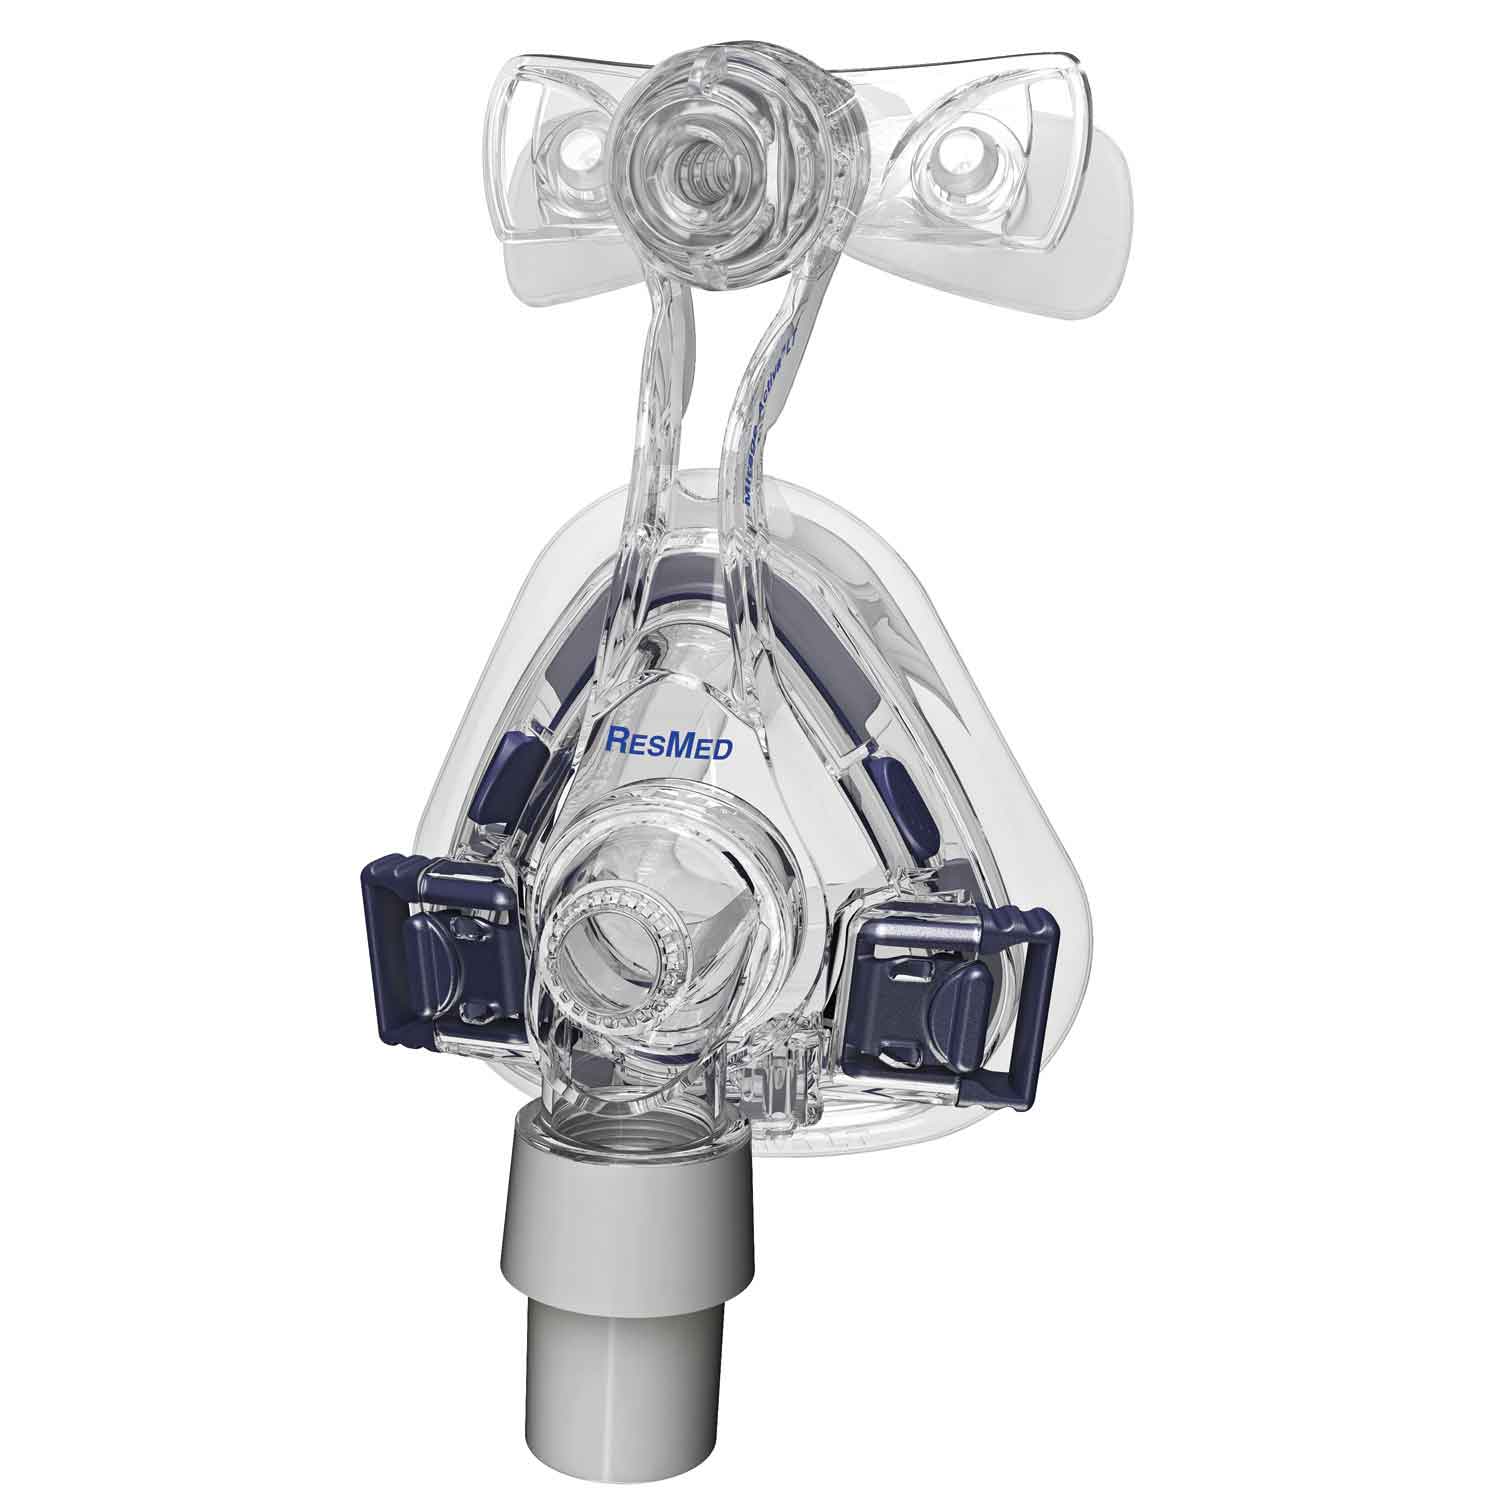 ResMed Mirage Activa LT Nasal Mask Complete System with Cushion and Headgear